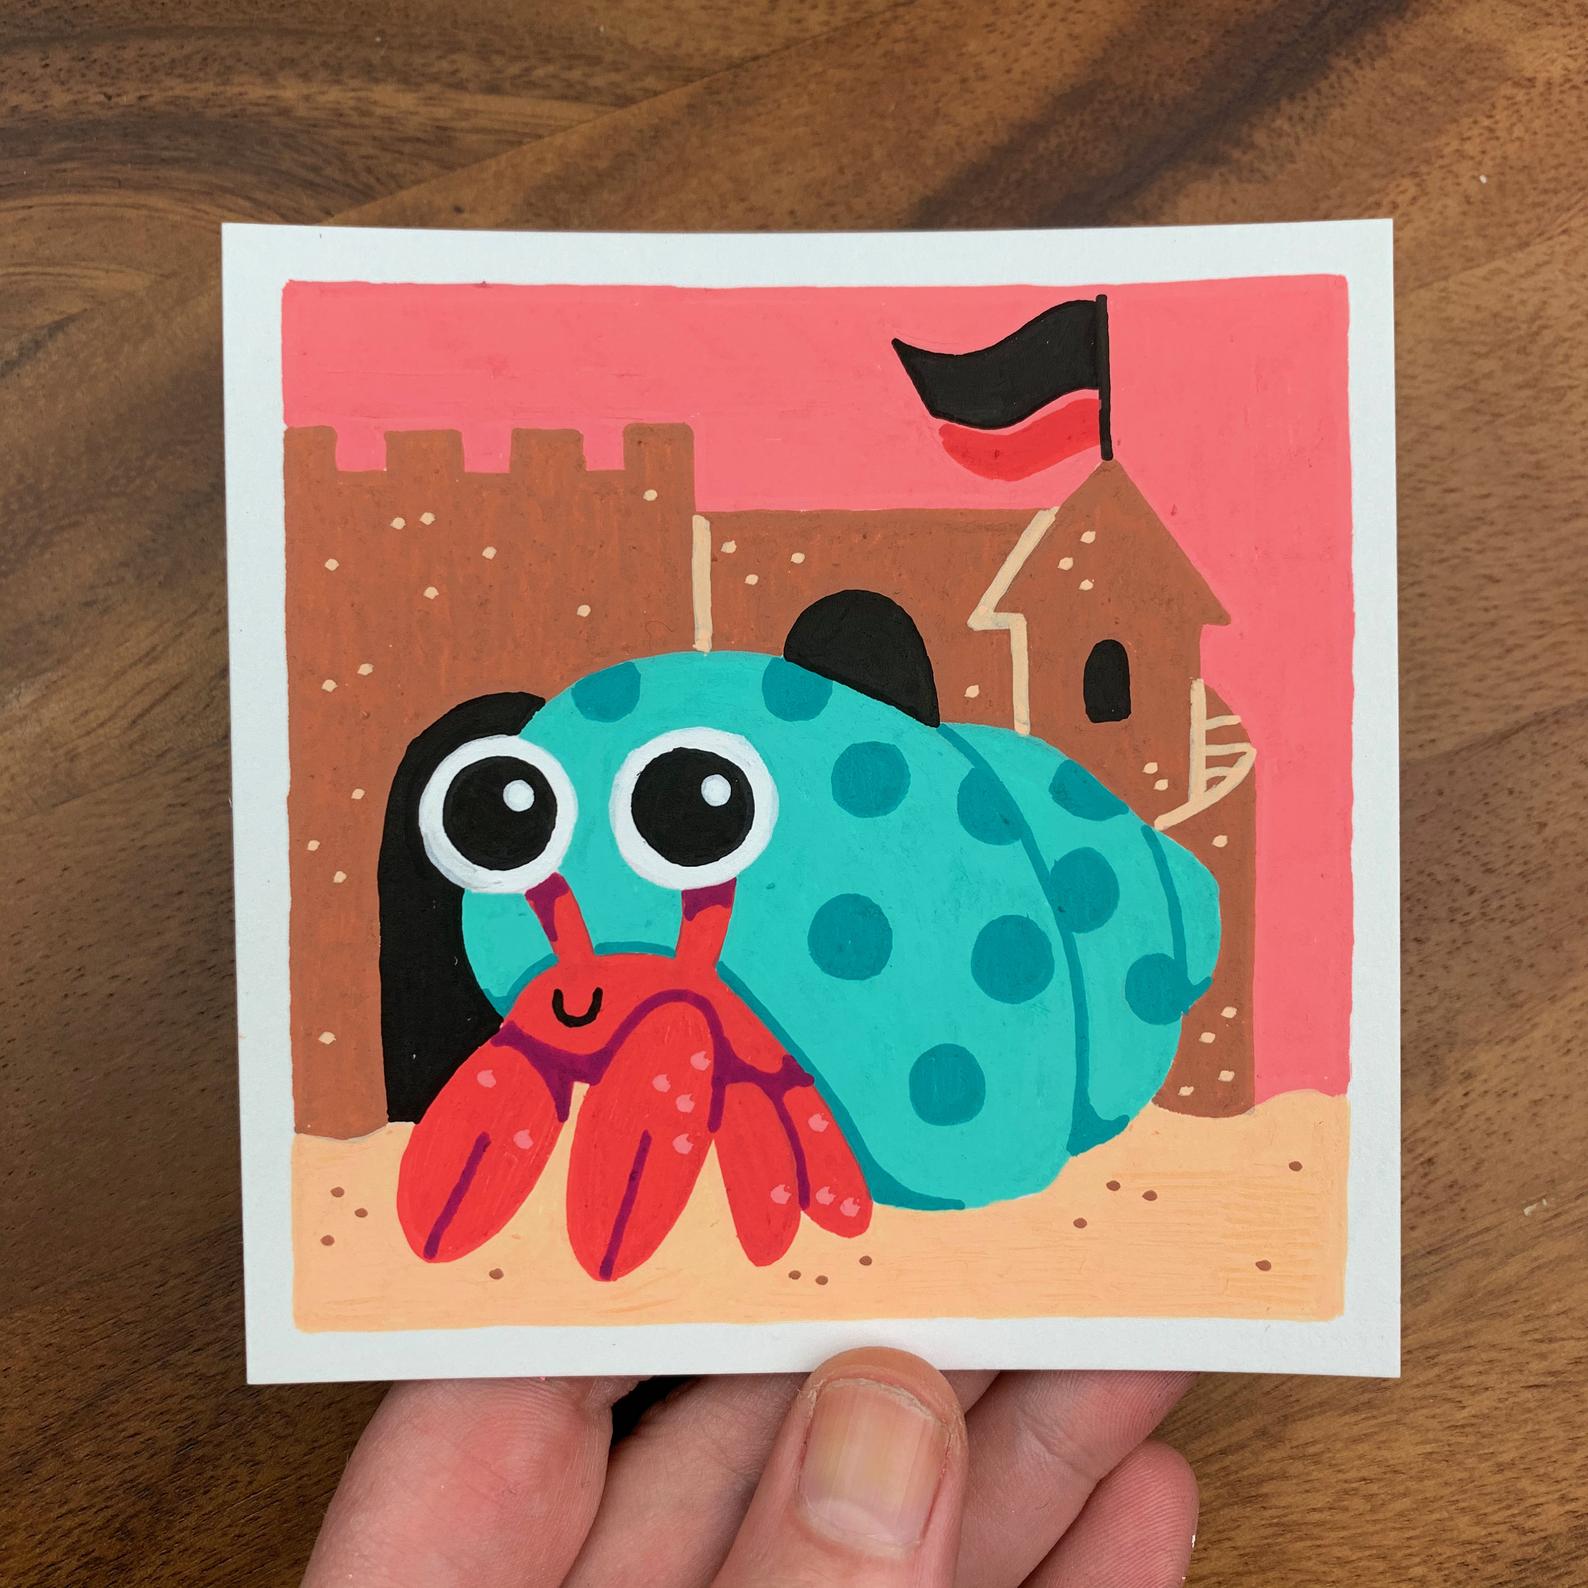 Original artwork of a cute hermit crab in front of a sand castle. Materials used: Uni-Posca paint markers.